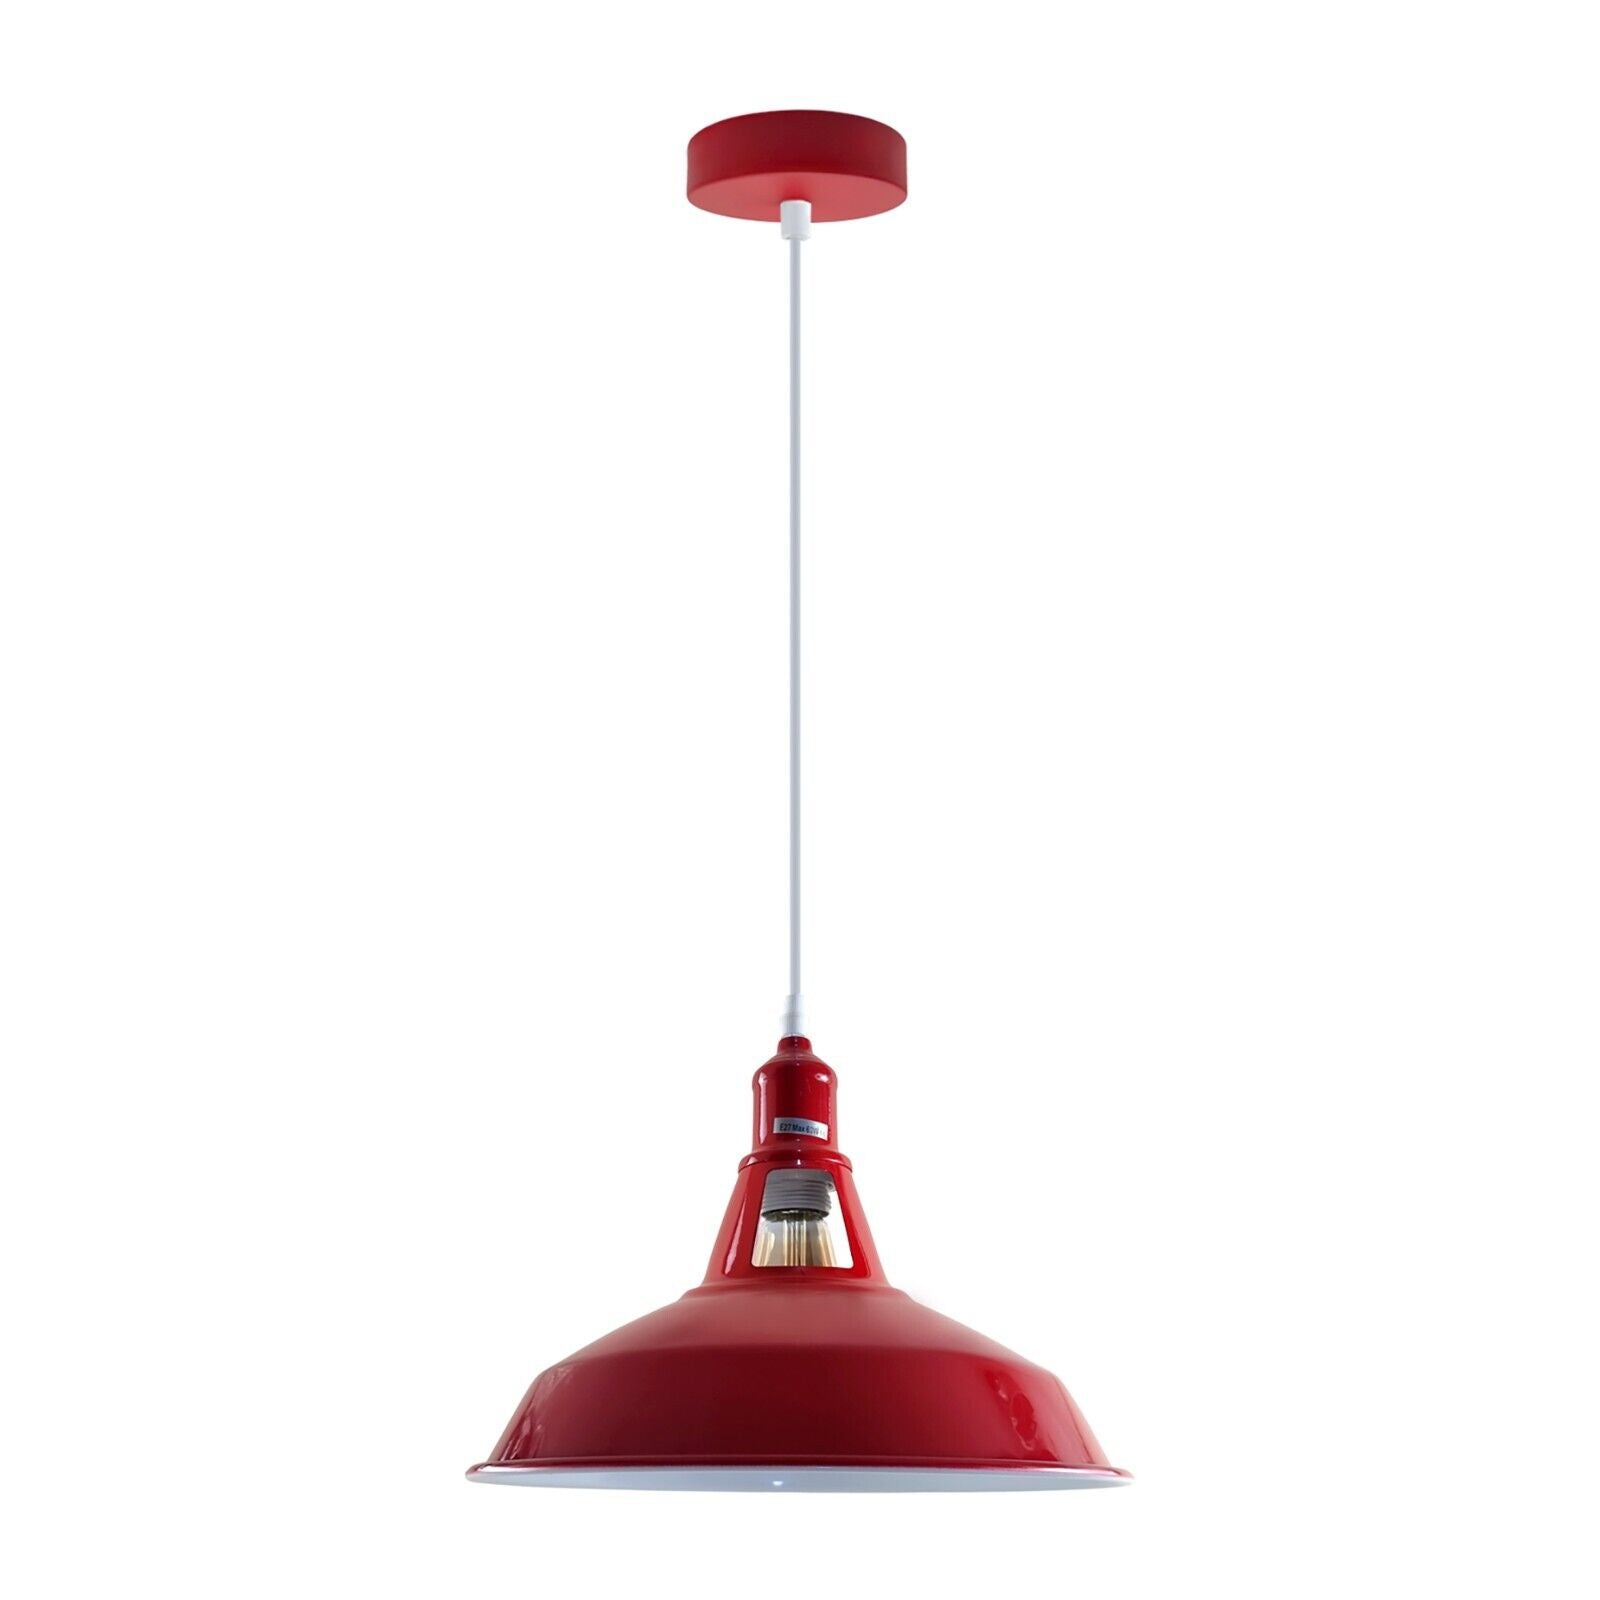 Red lampshade hanging from the ceiling